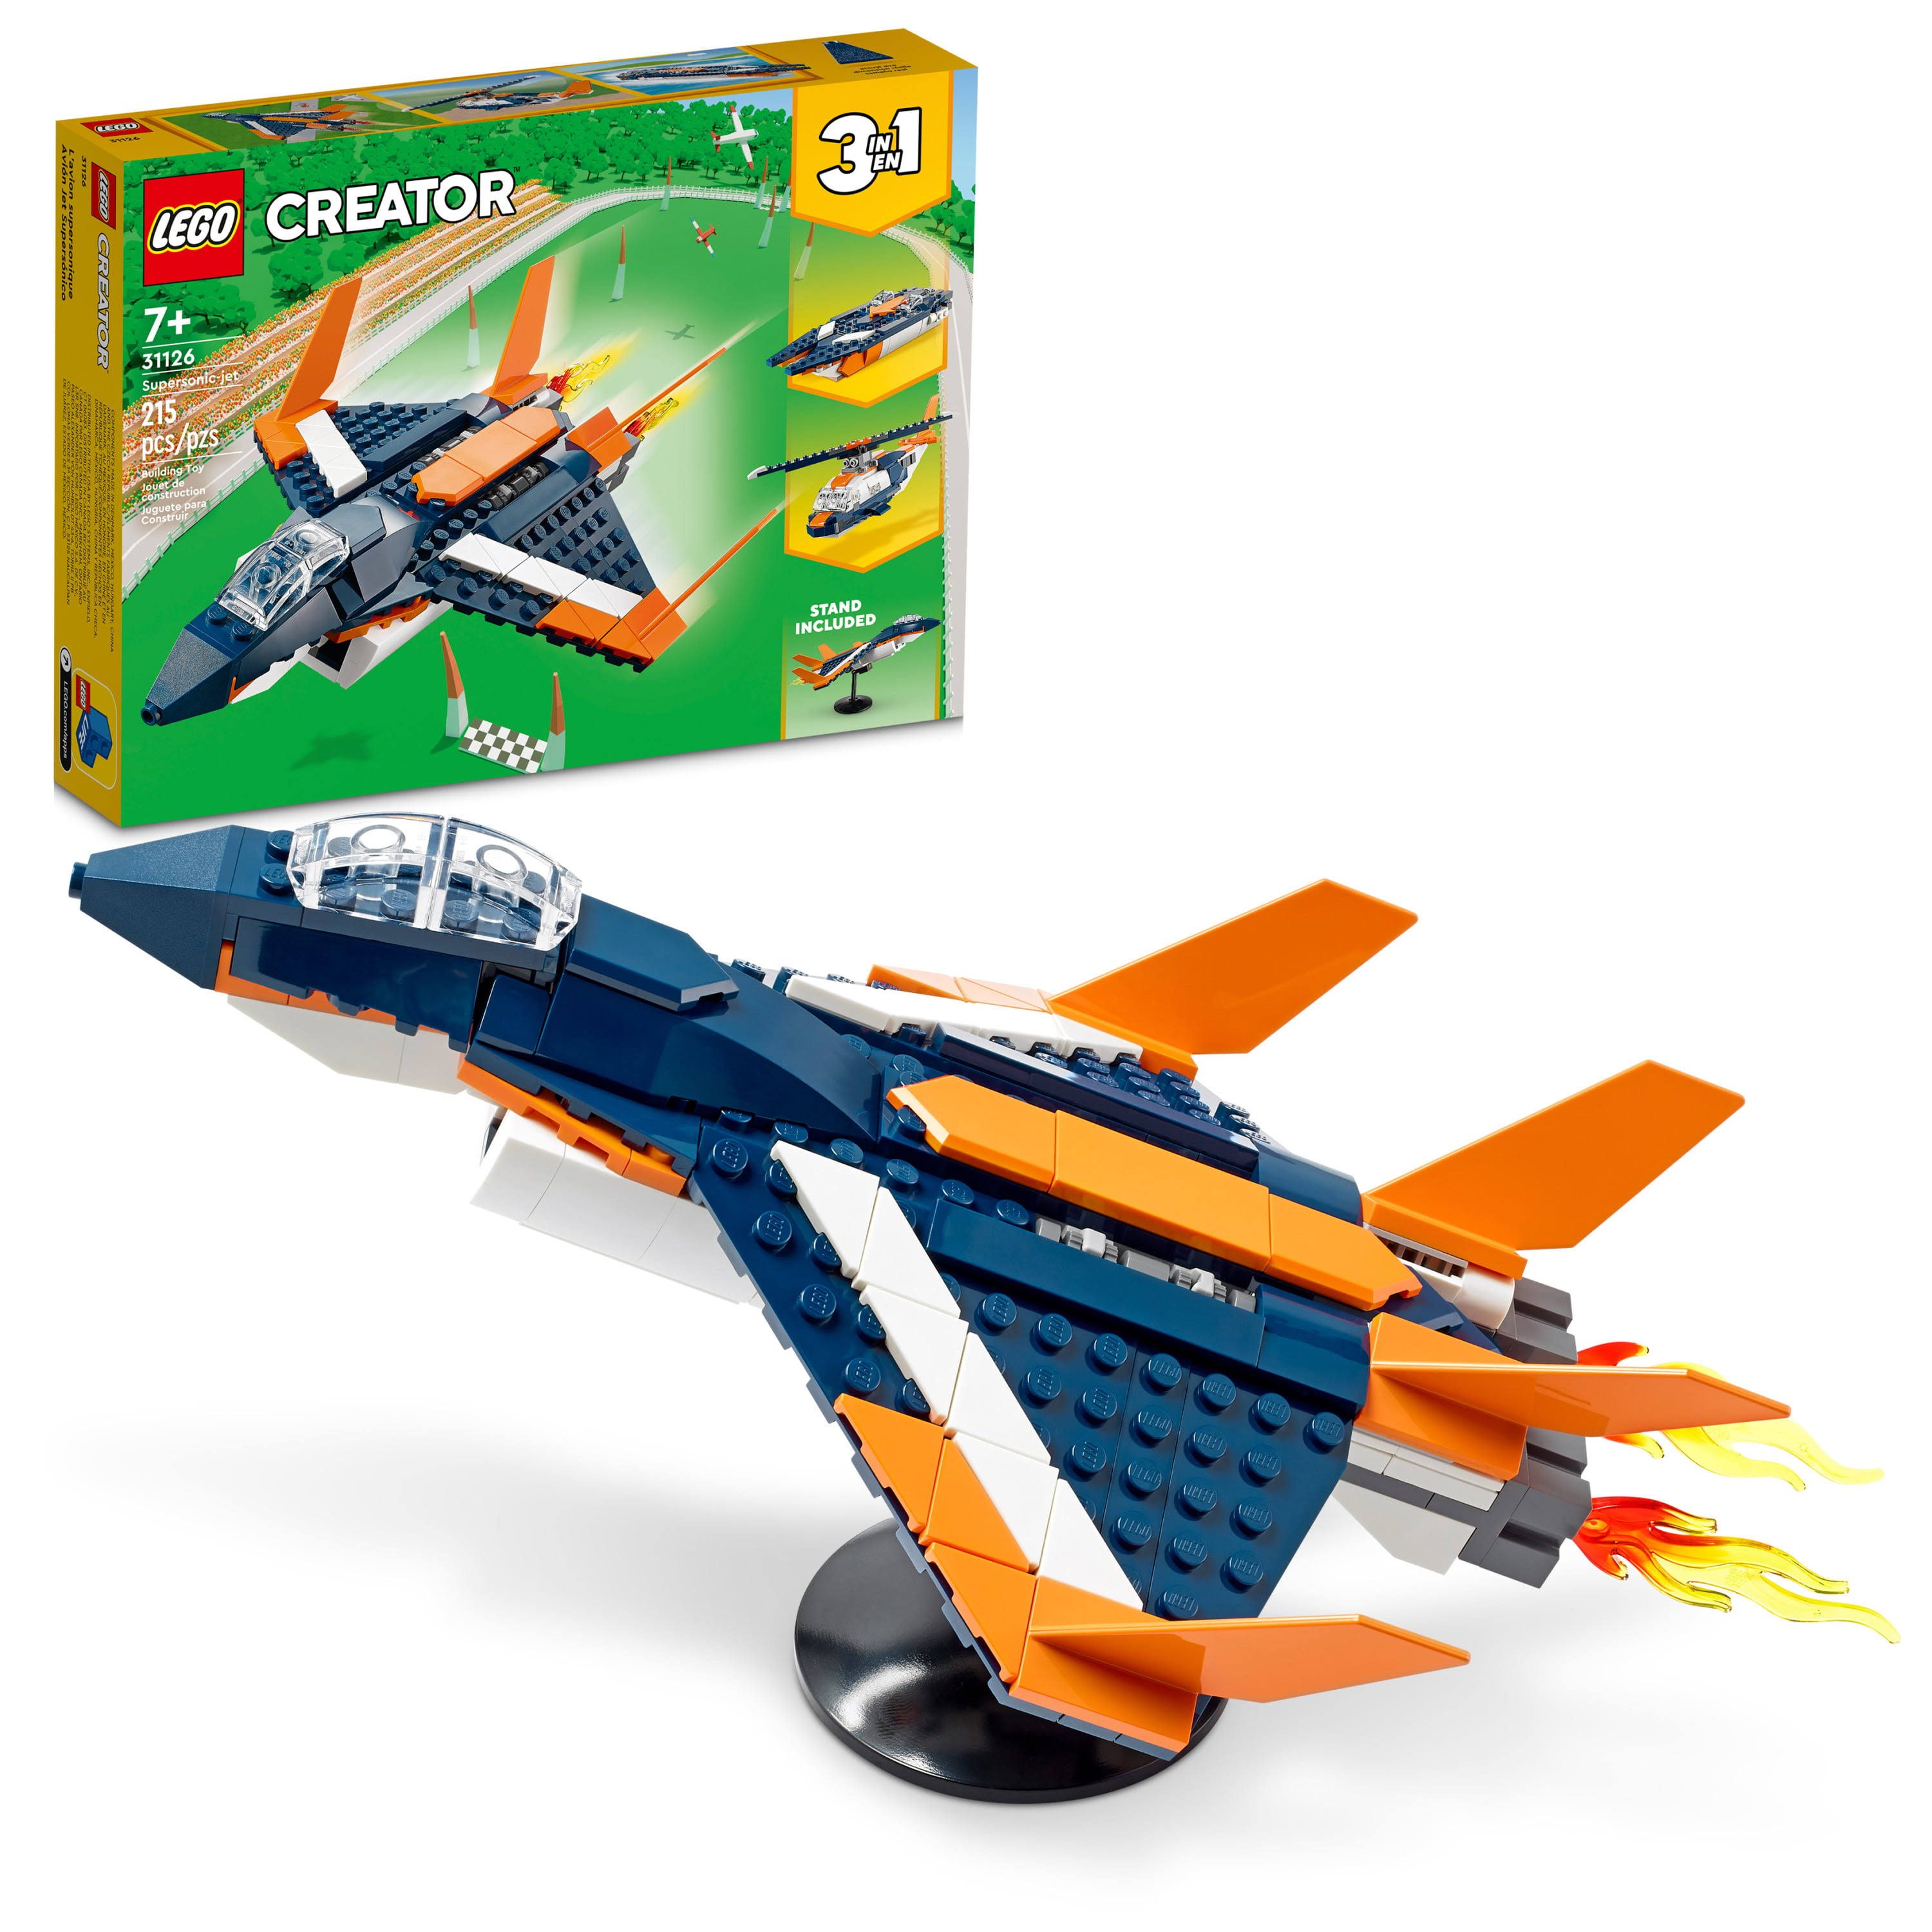 LEGO CREATOR: 3in1 Supersonic Jet, Helicopter & Boat Toy (31126)